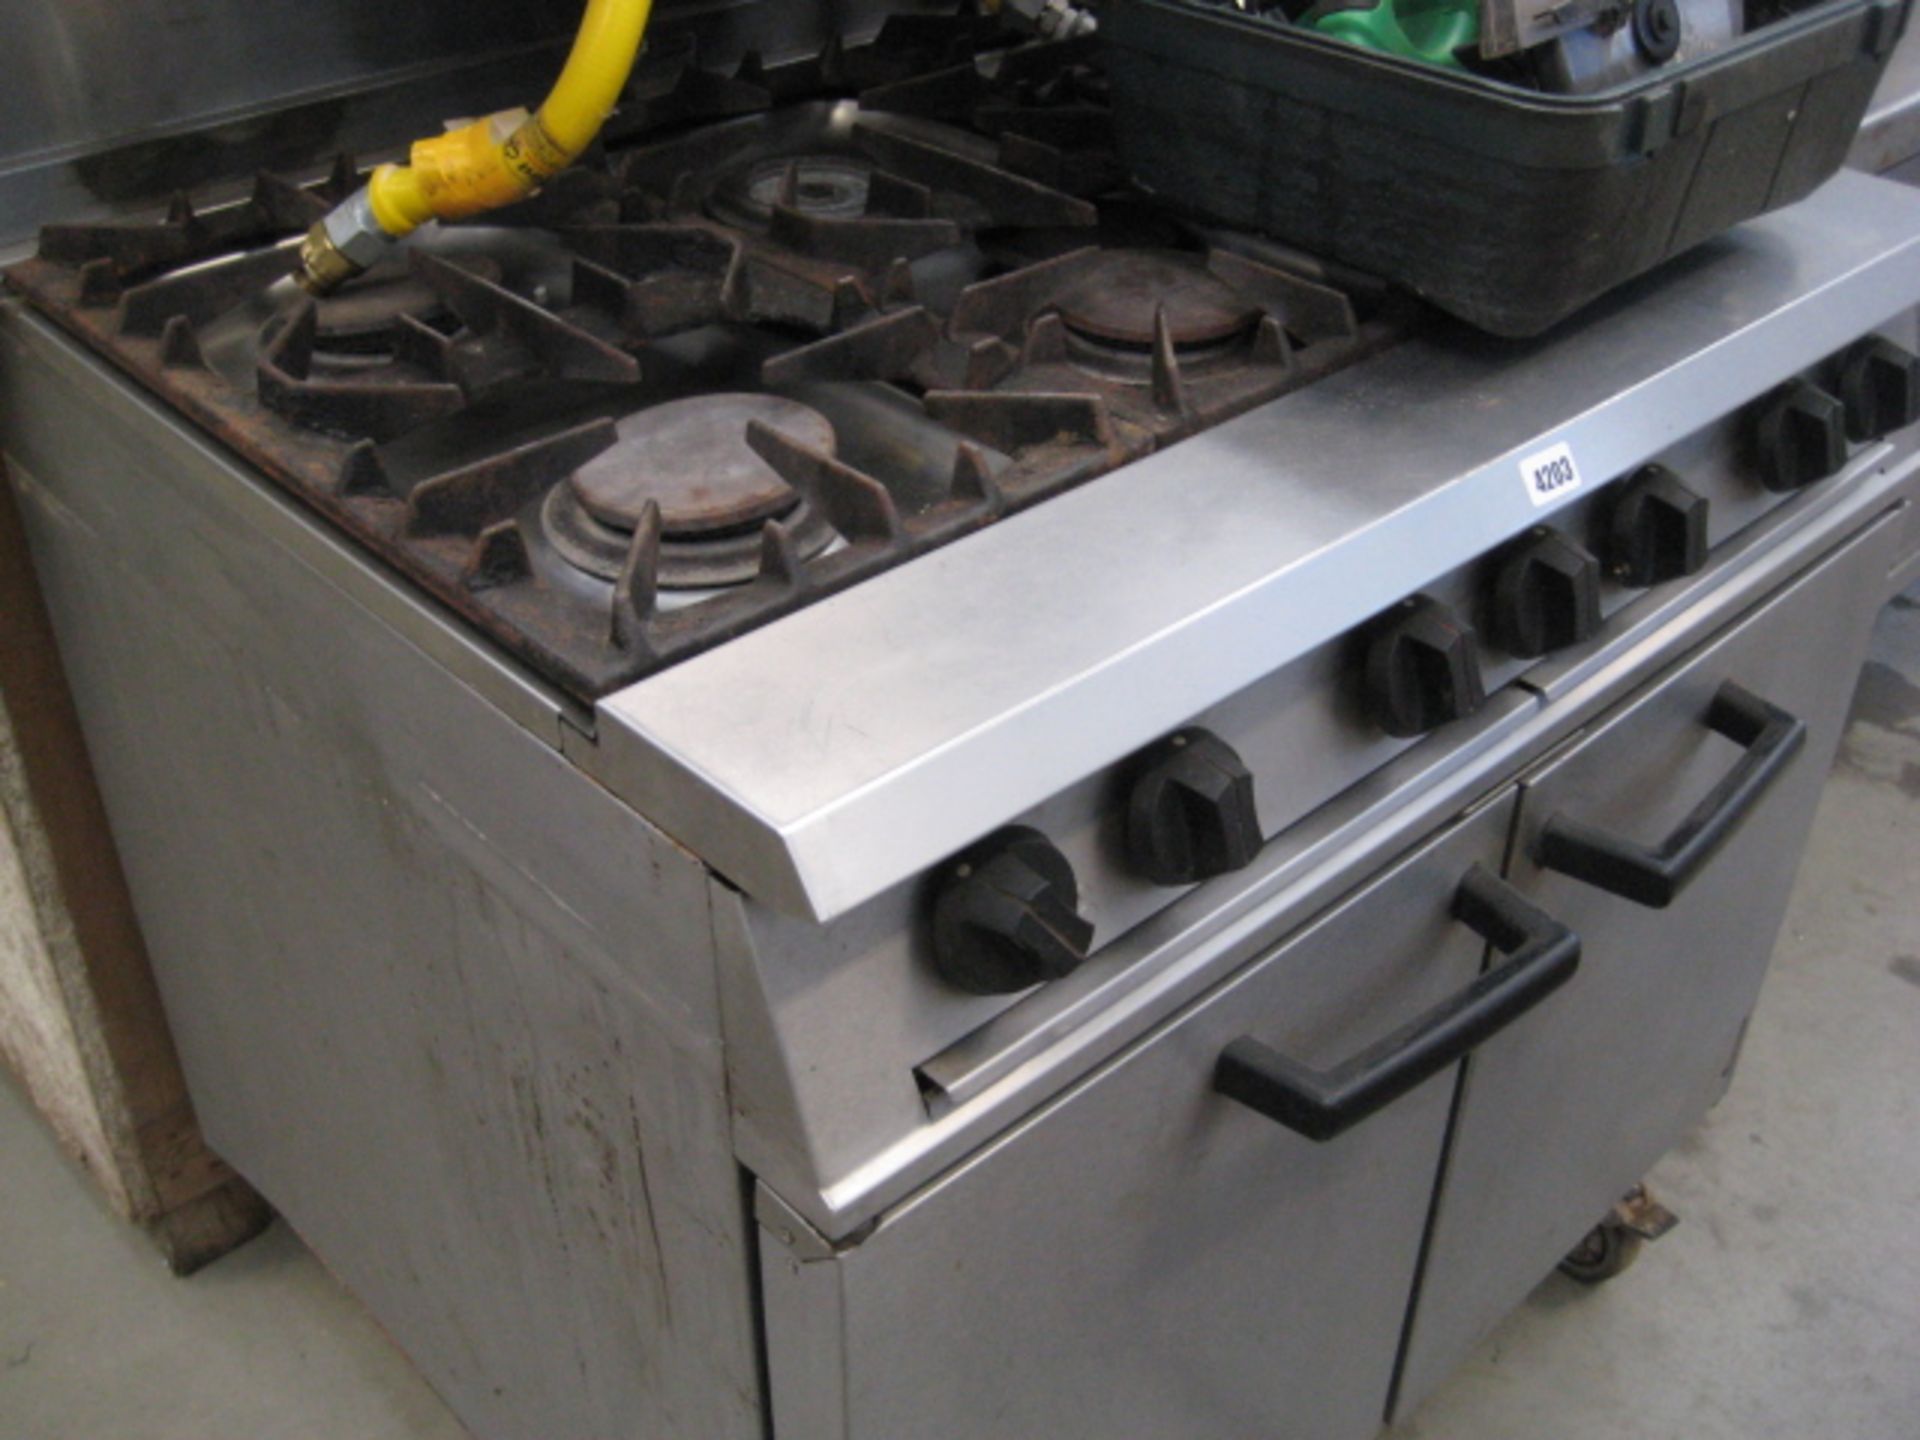 Falcon double door gas oven with 6 burner hob - Image 2 of 3